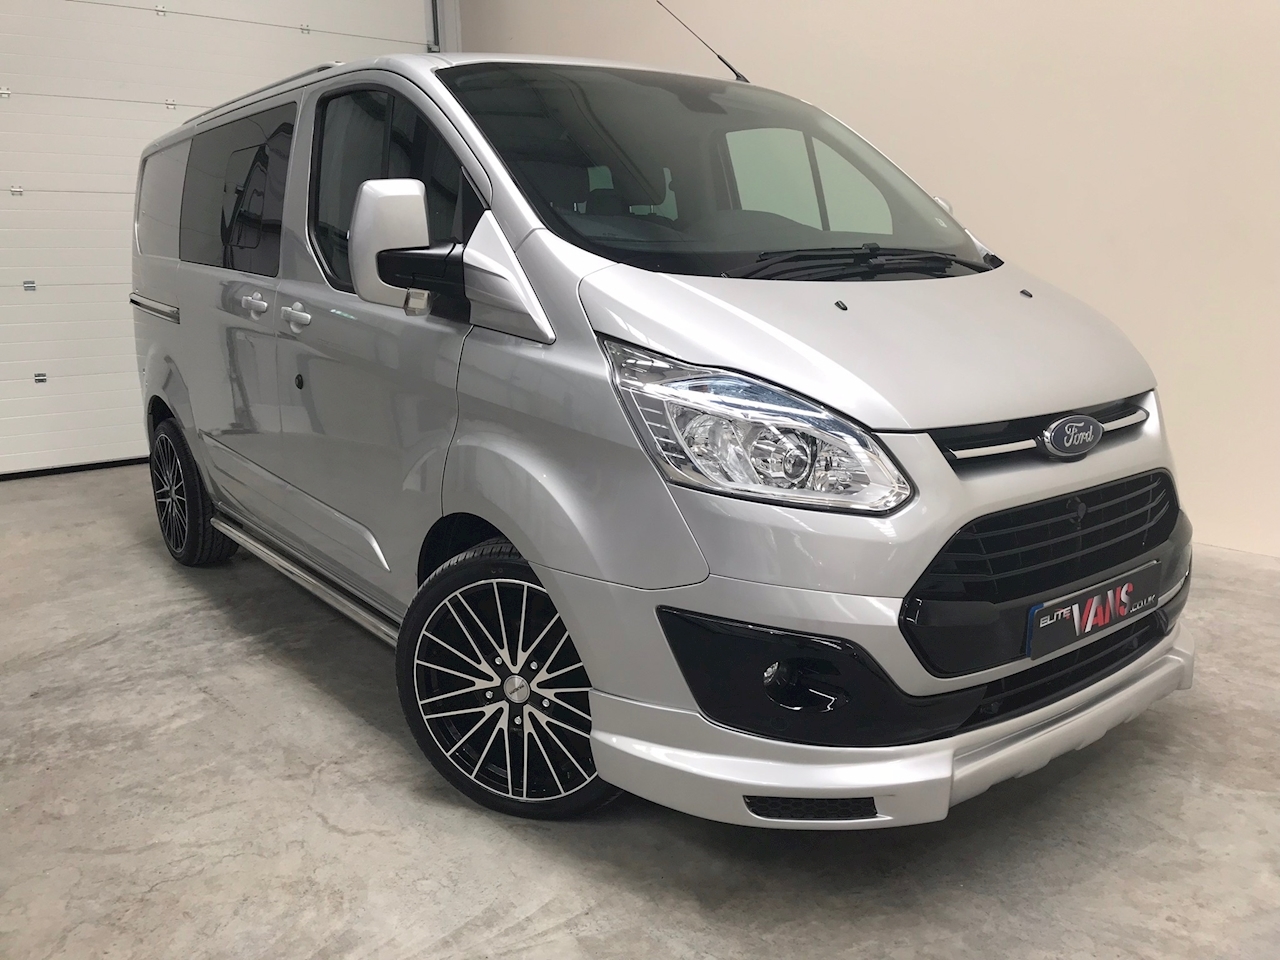 2016 65   Ford Transit Custom 290 Double Cab in Van 2.2 TDCI Limited [Elite Edition] [SWB] [125]